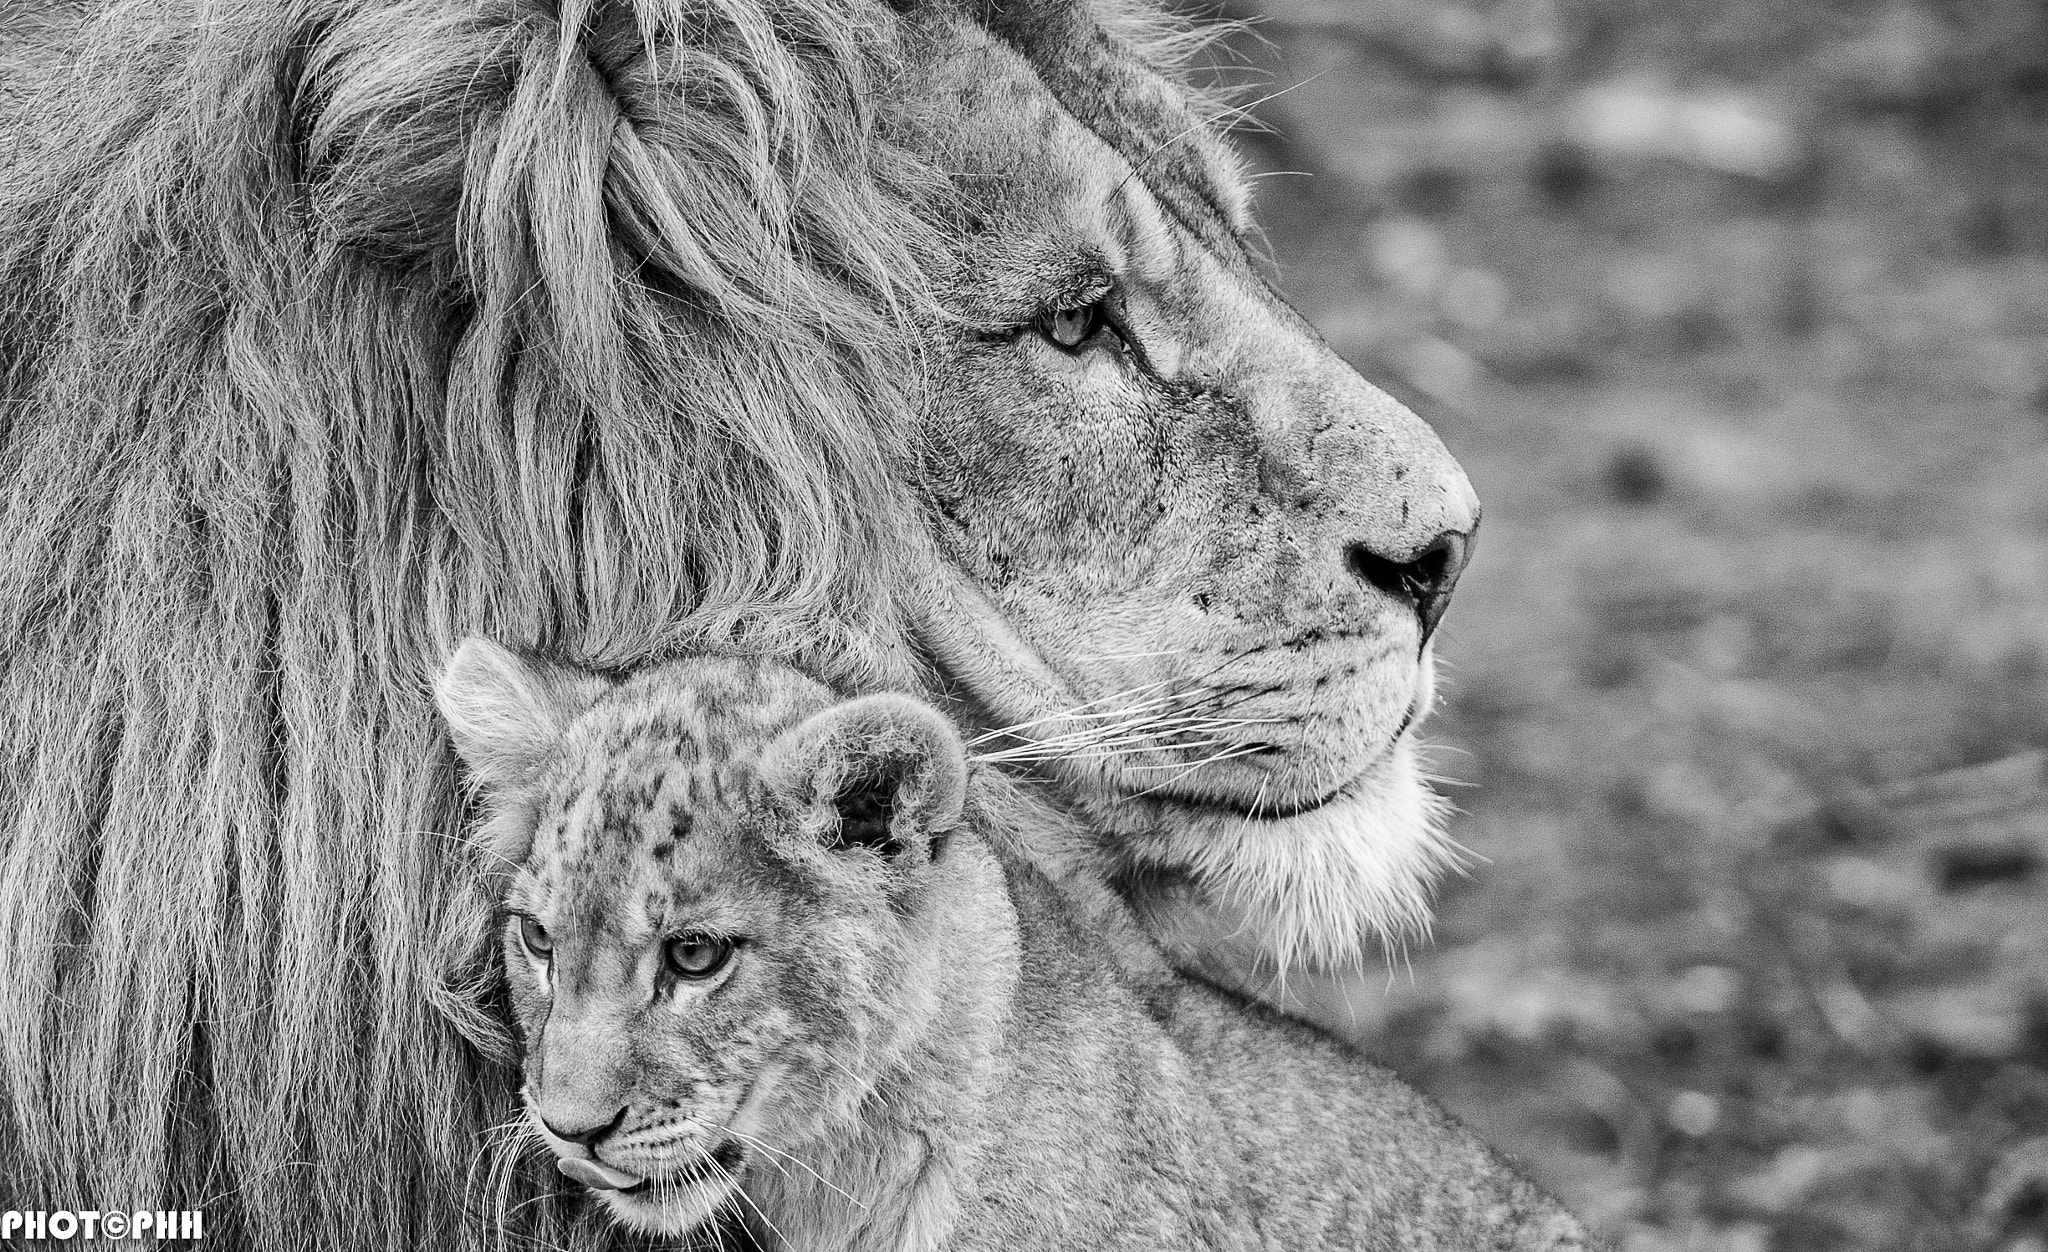 Nikon D3 sample photo. The king and the lion photography